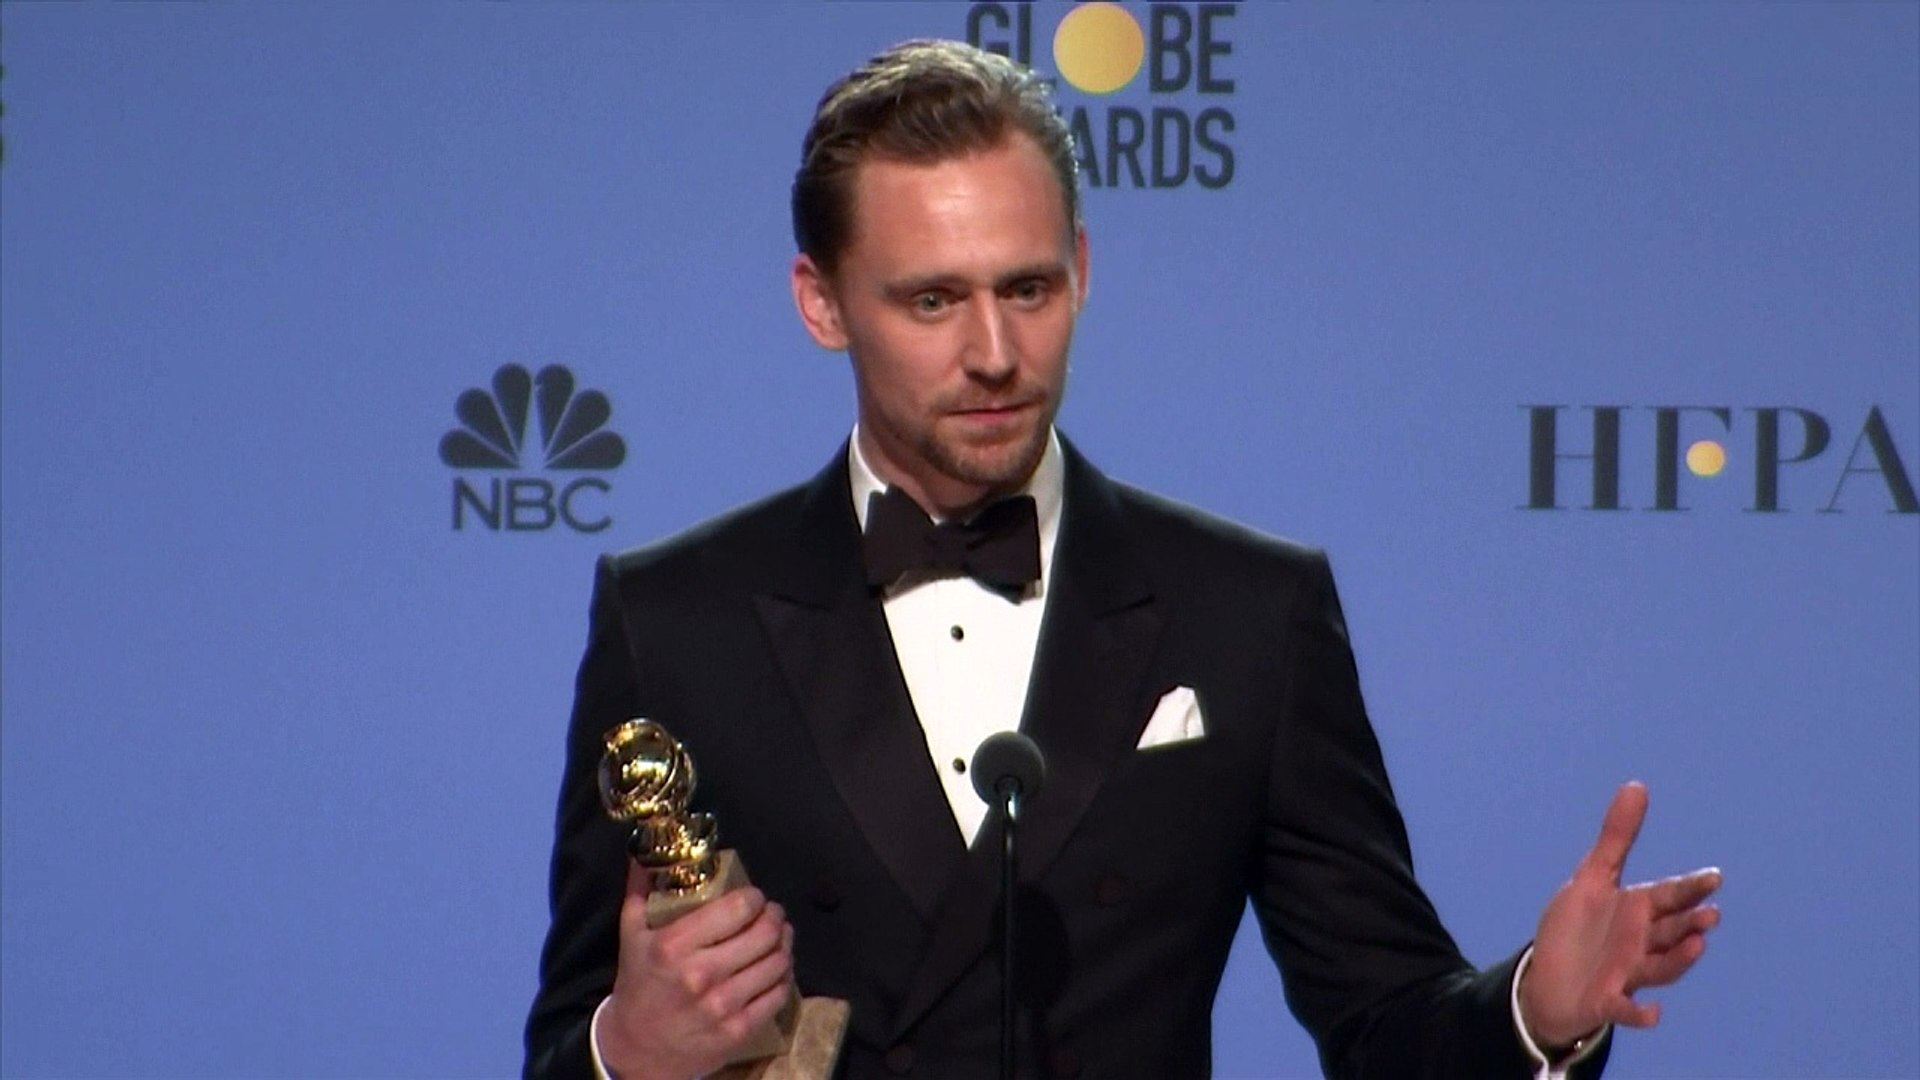 Golden Globes: Tom Hiddleston on meeting Carrie Fisher - video Dailymotion